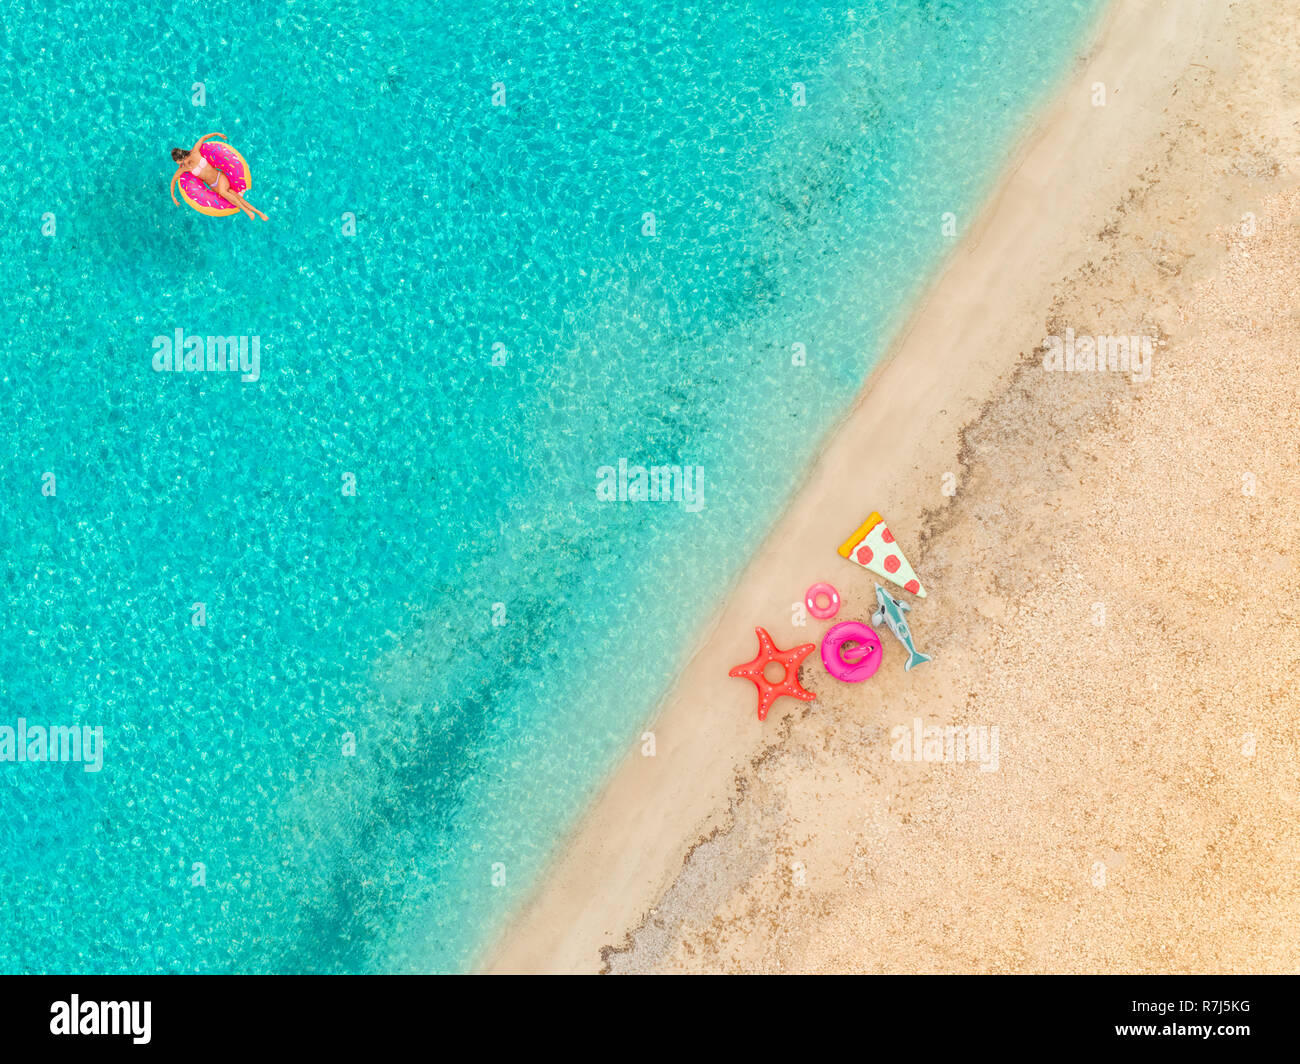 Aerial view of woman floating on inflatable donut mattress by sandy beach and inflatable rings. Stock Photo